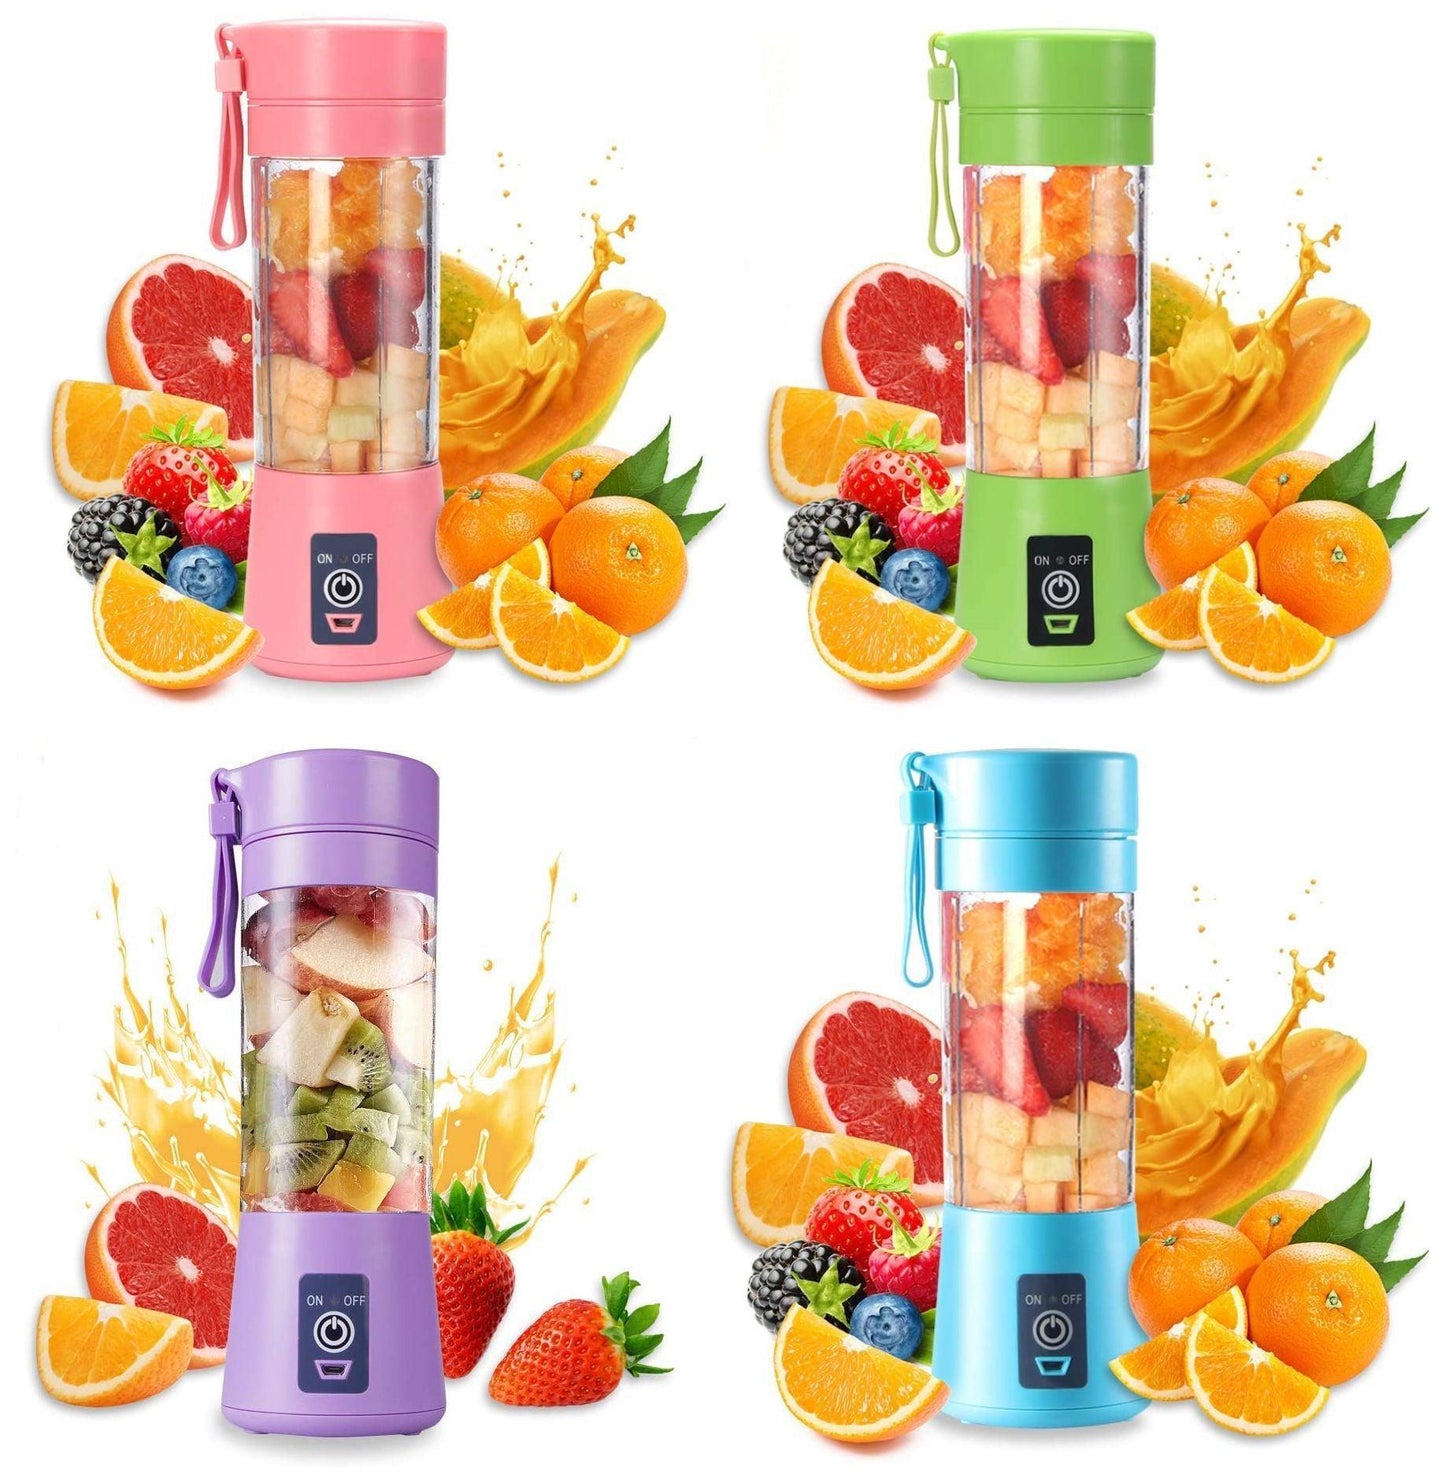 Portable Blender With USB Rechargeable - Silvis21 ™